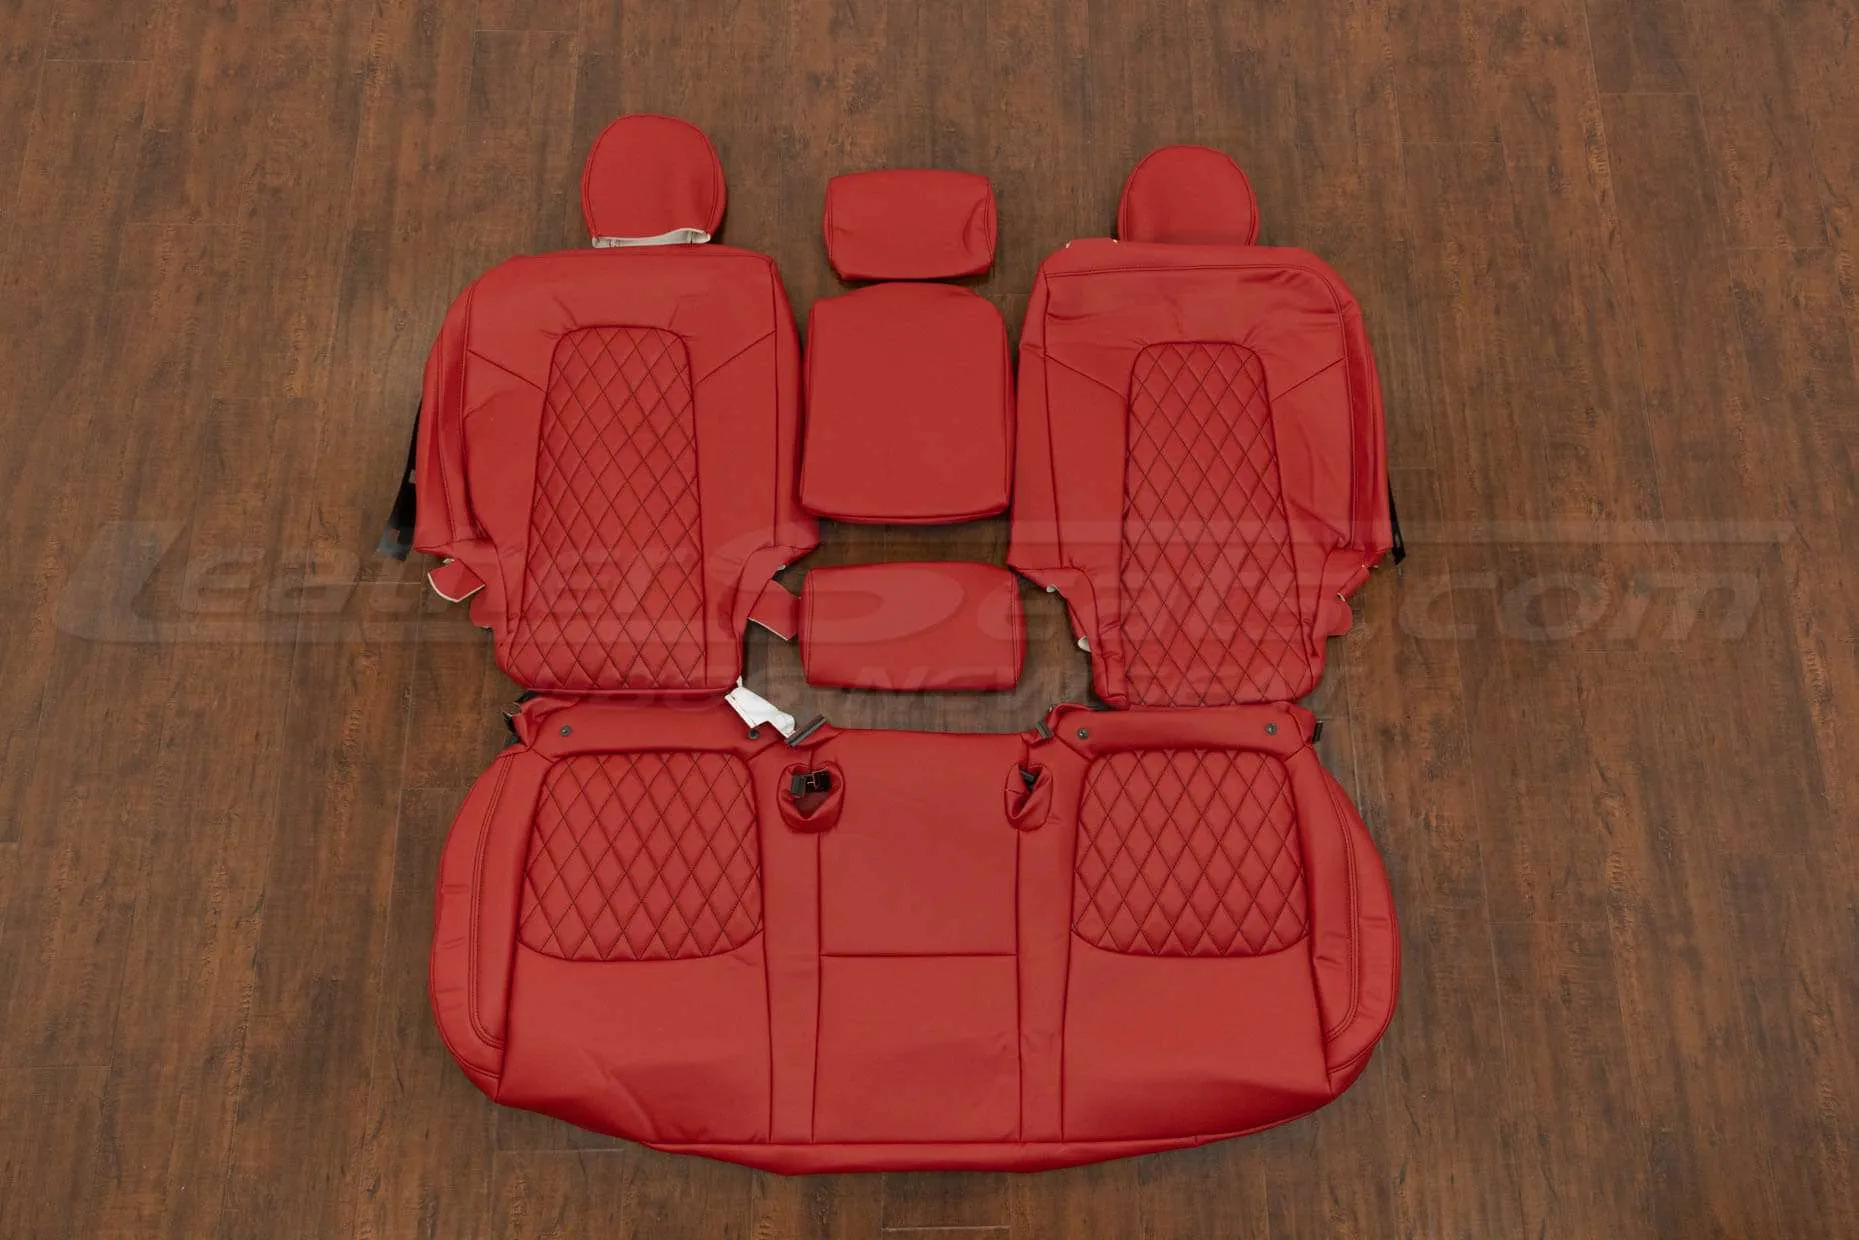 Tesla Model Y Diamond Quilted Leather Seats - Red - Rear seat upholstery